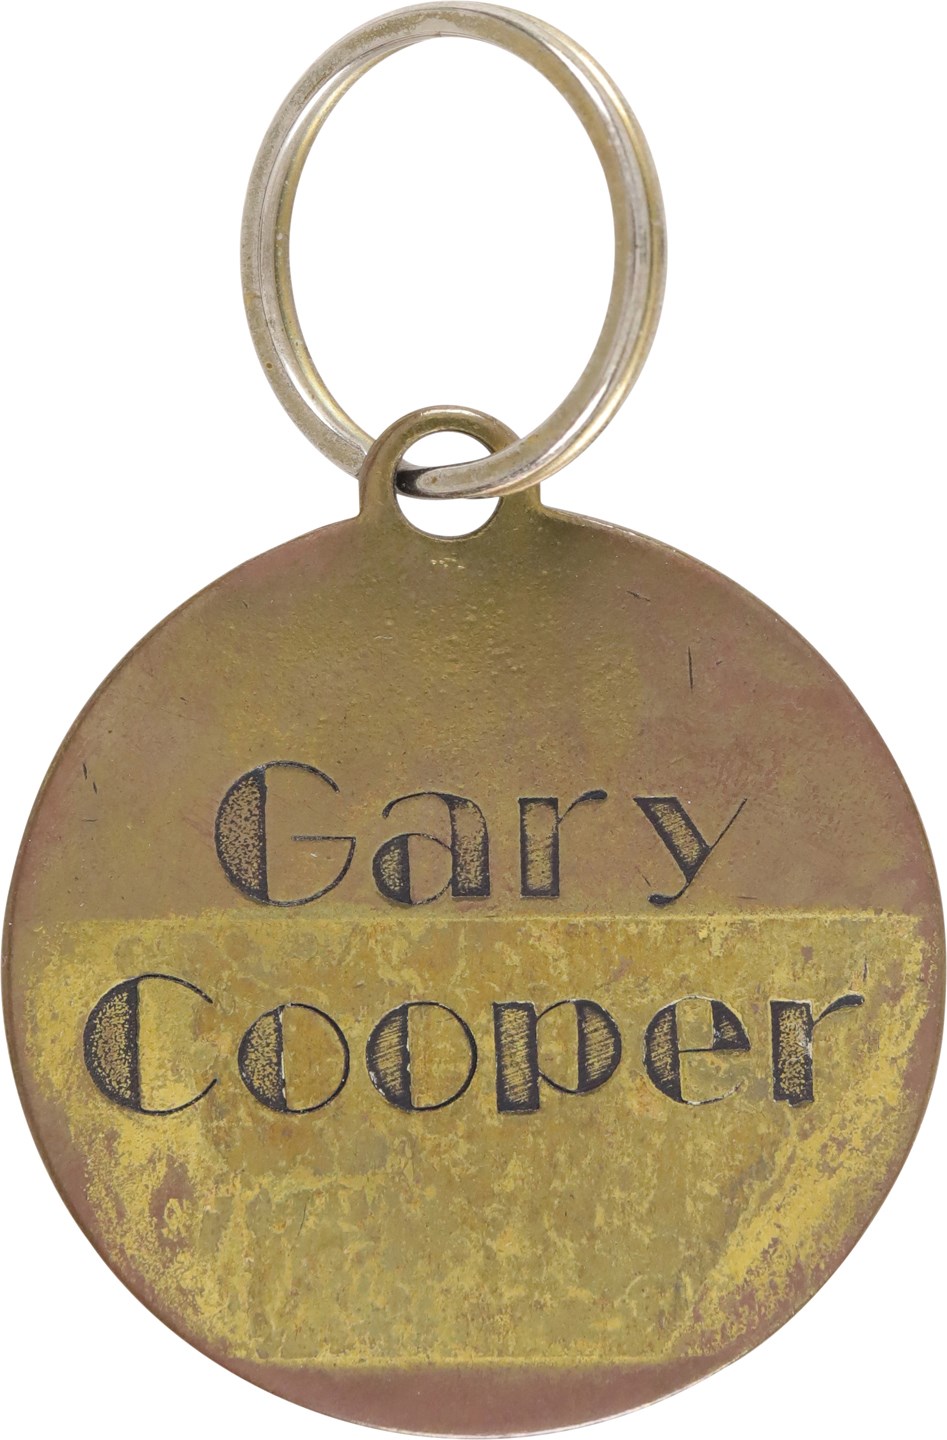 Rock And Pop Culture - Gary Cooper Paramount Pictures Key Fob